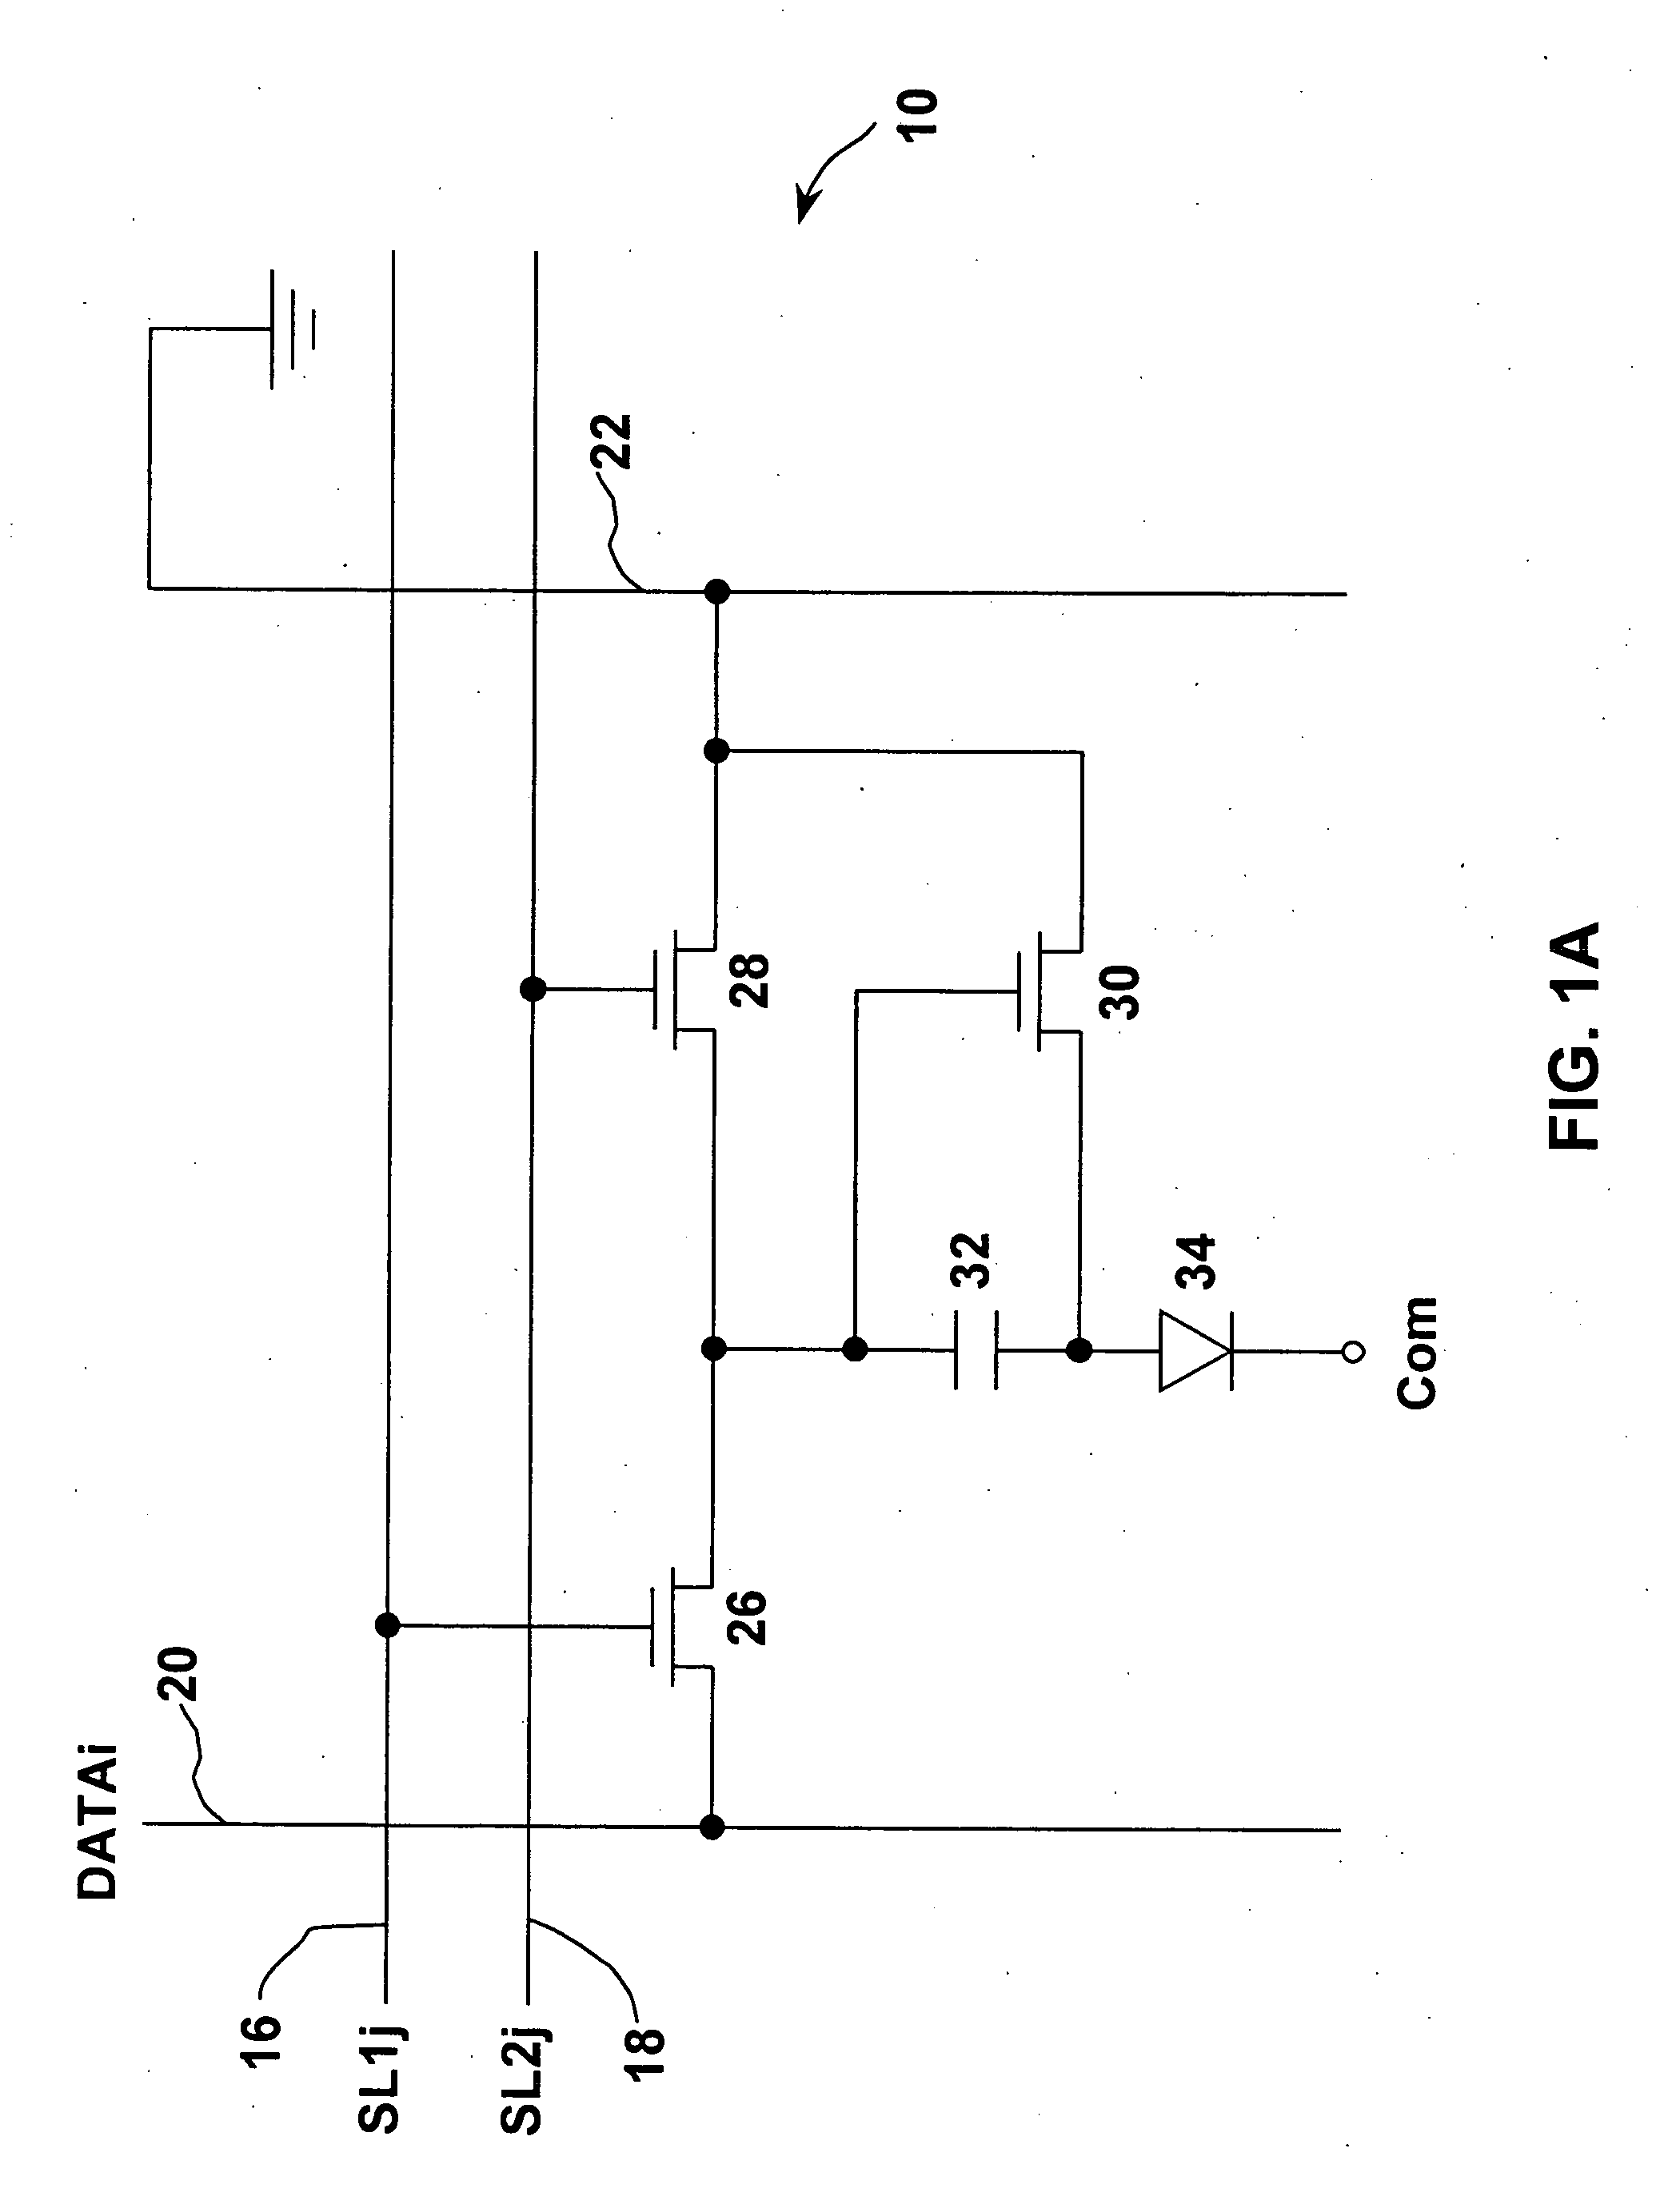 Organic light emitting diode circuit having voltage compensation function and method for compensating